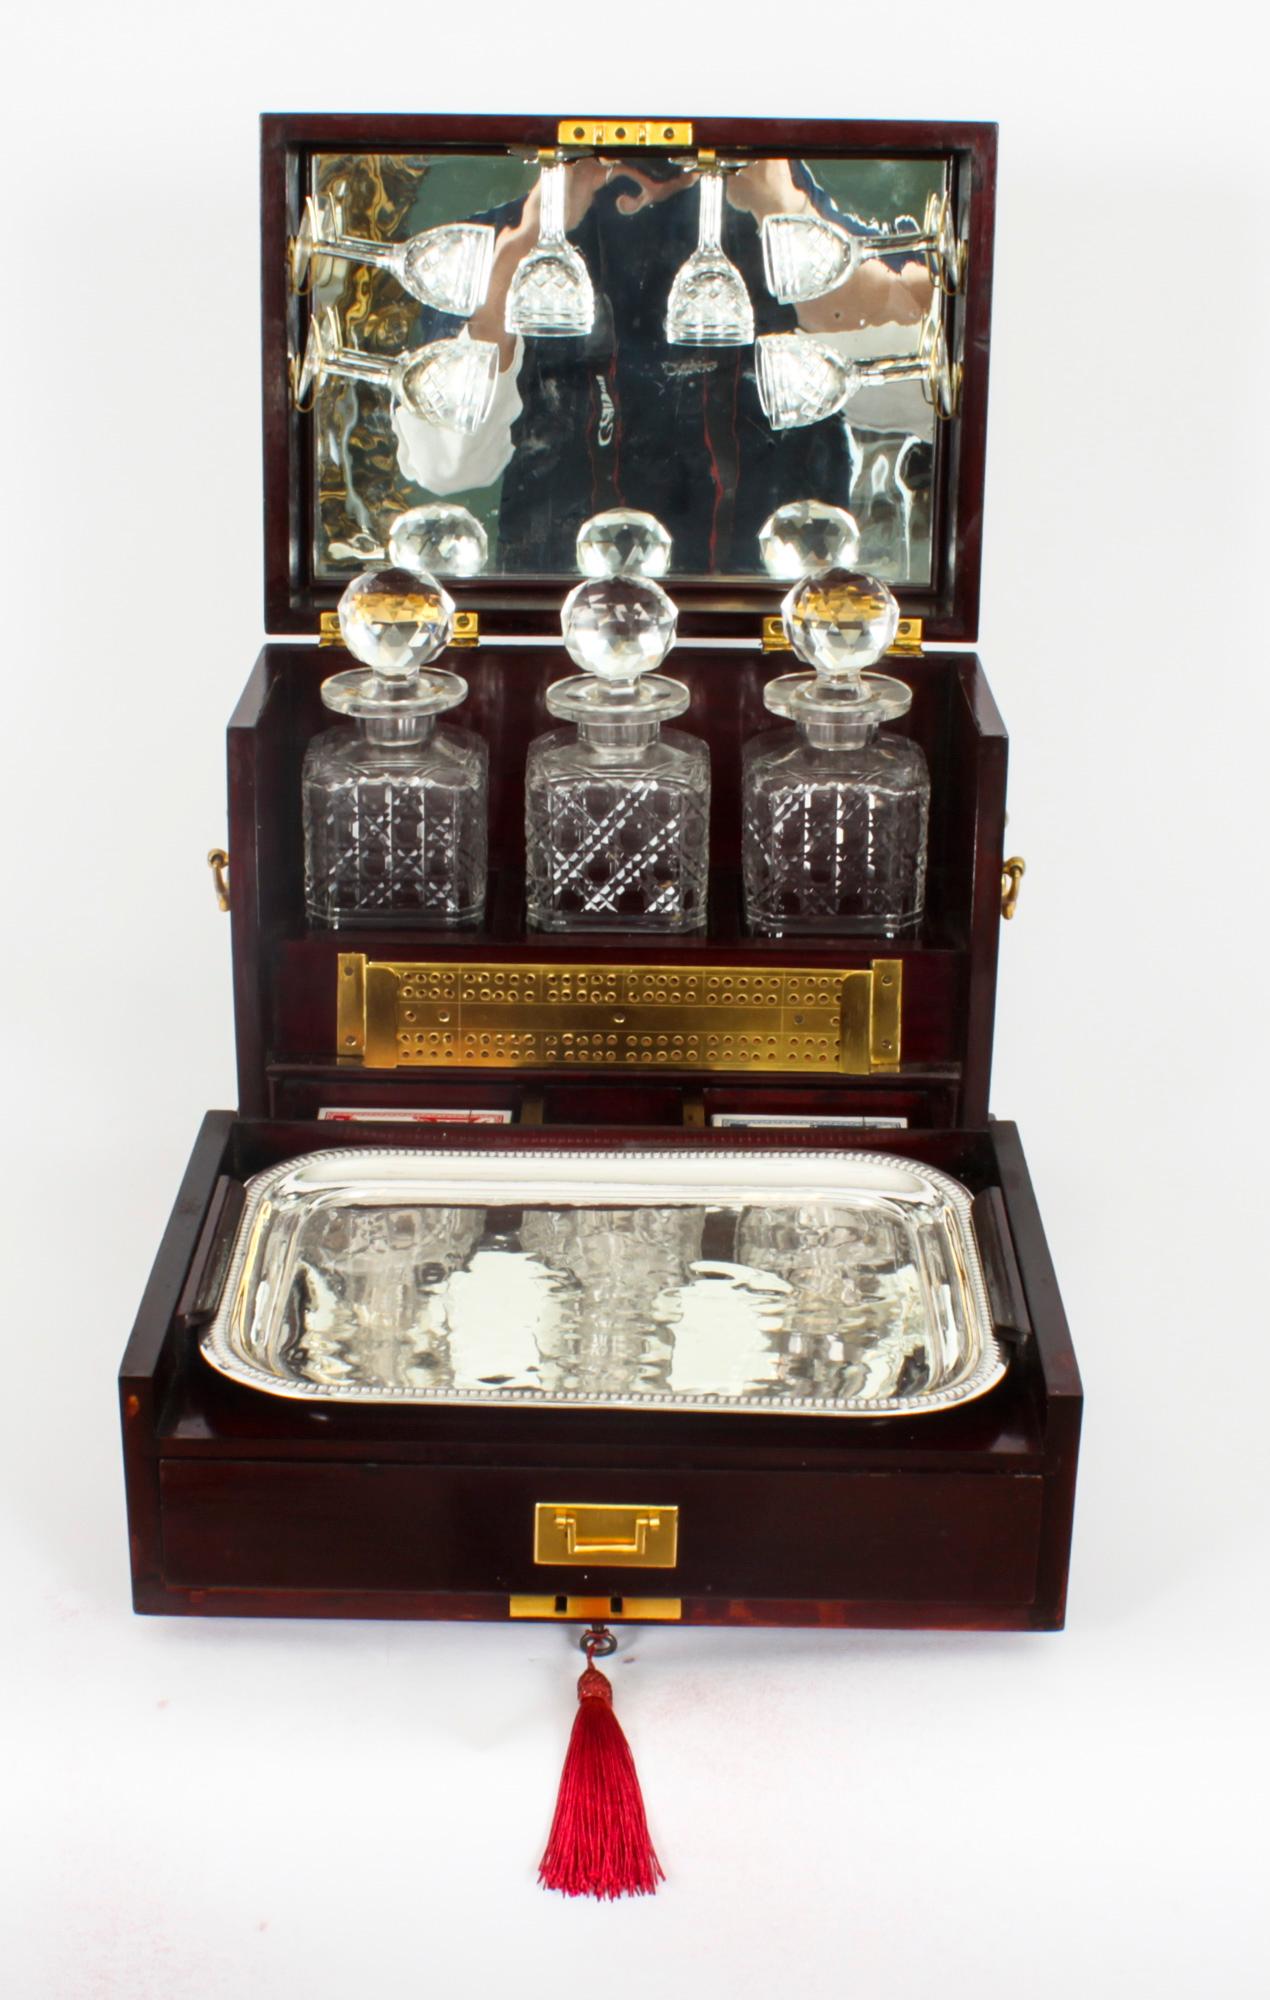 This is a fabulous antique English tantalus, circa 1880 in age. It consists of three cut crystal liquor bottles with stoppers, 6 etched stemmed glasses, a silver plated tray and a fitted cribbage board - all housed in a magnificent mahogany casket